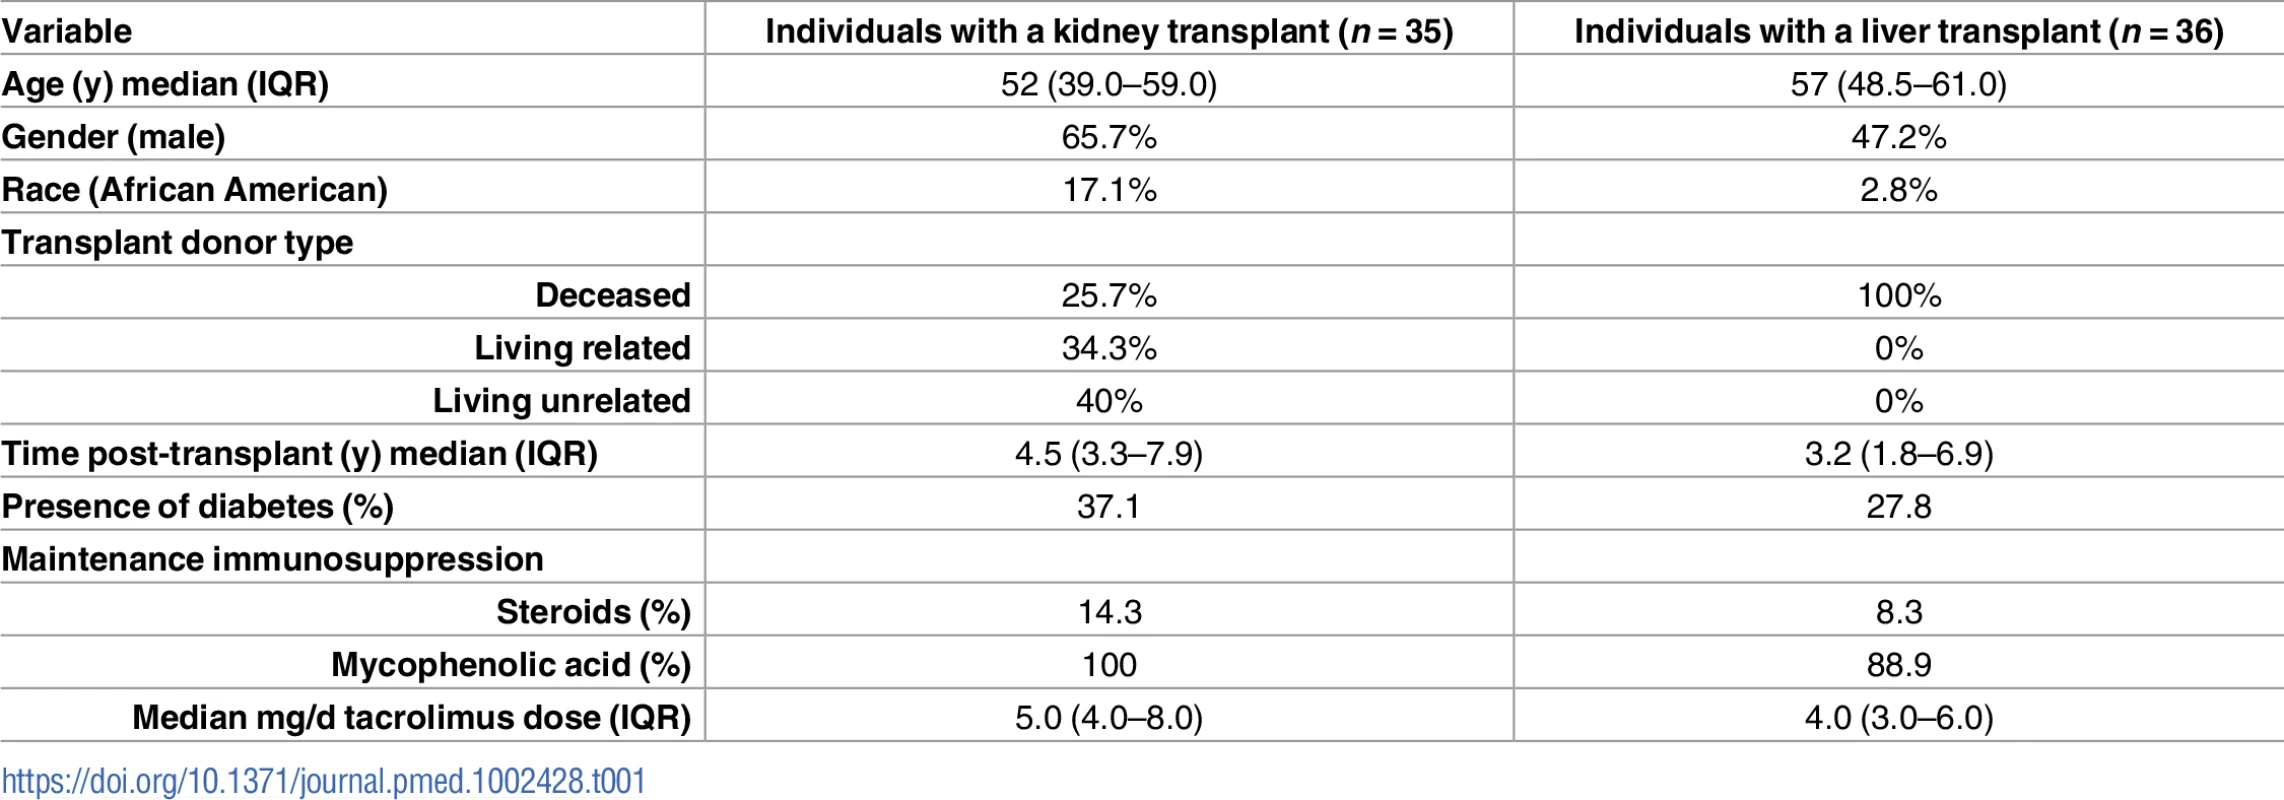 Demographic and baseline characteristics of analyzed study individuals with a kidney or liver transplant.